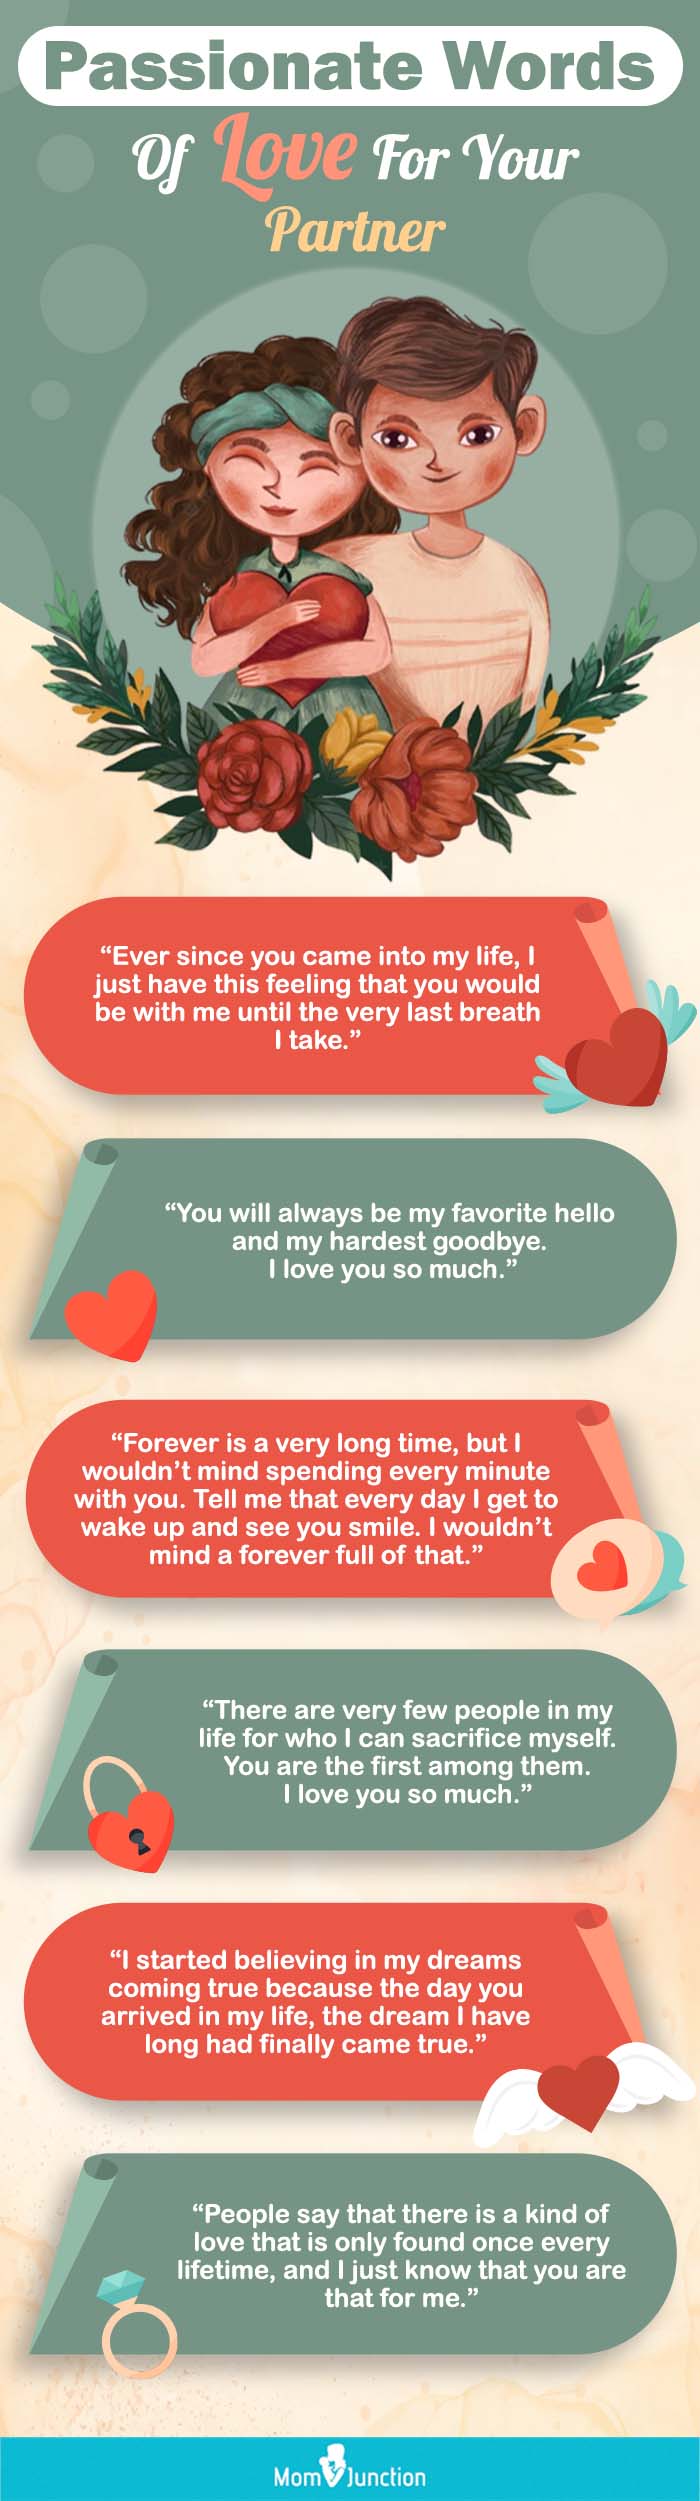 passionate words of love for your partner [infographic]